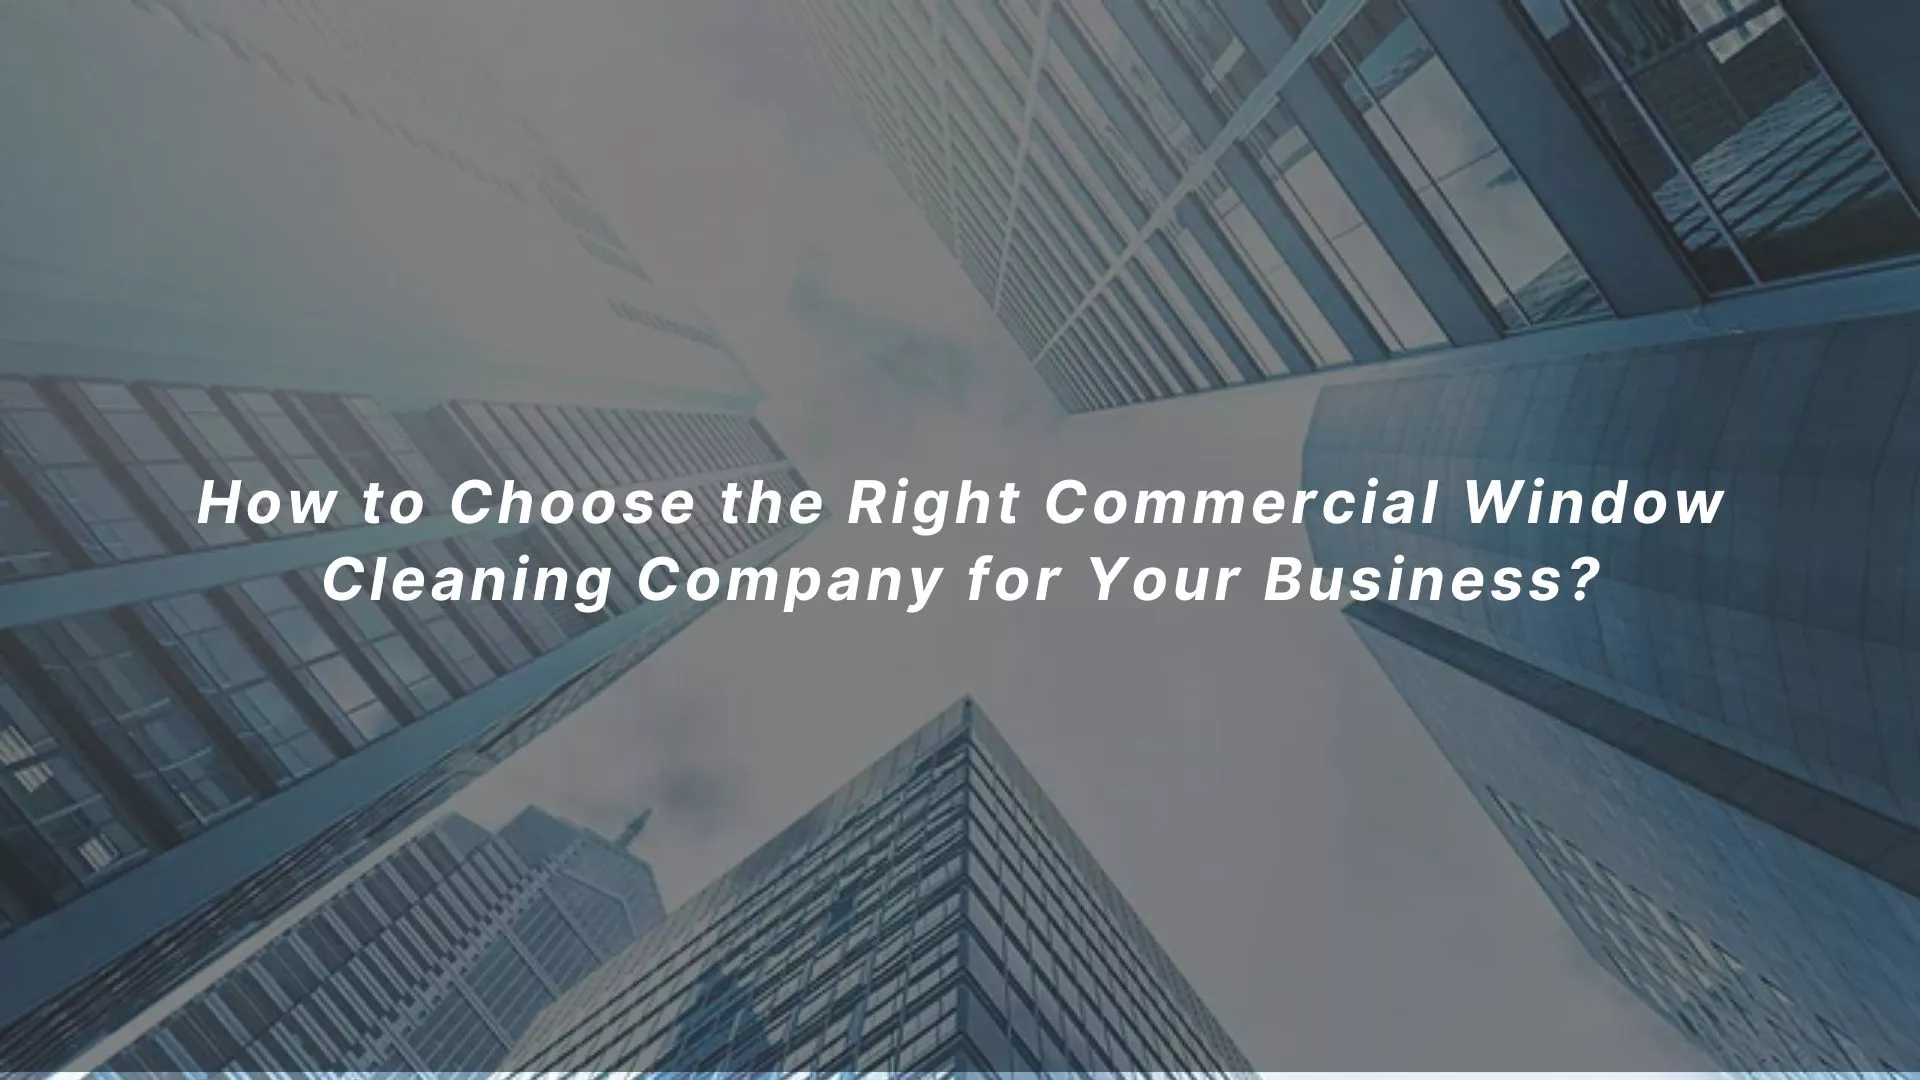 How to Choose the Right Commercial Window Cleaning Company for Your Business